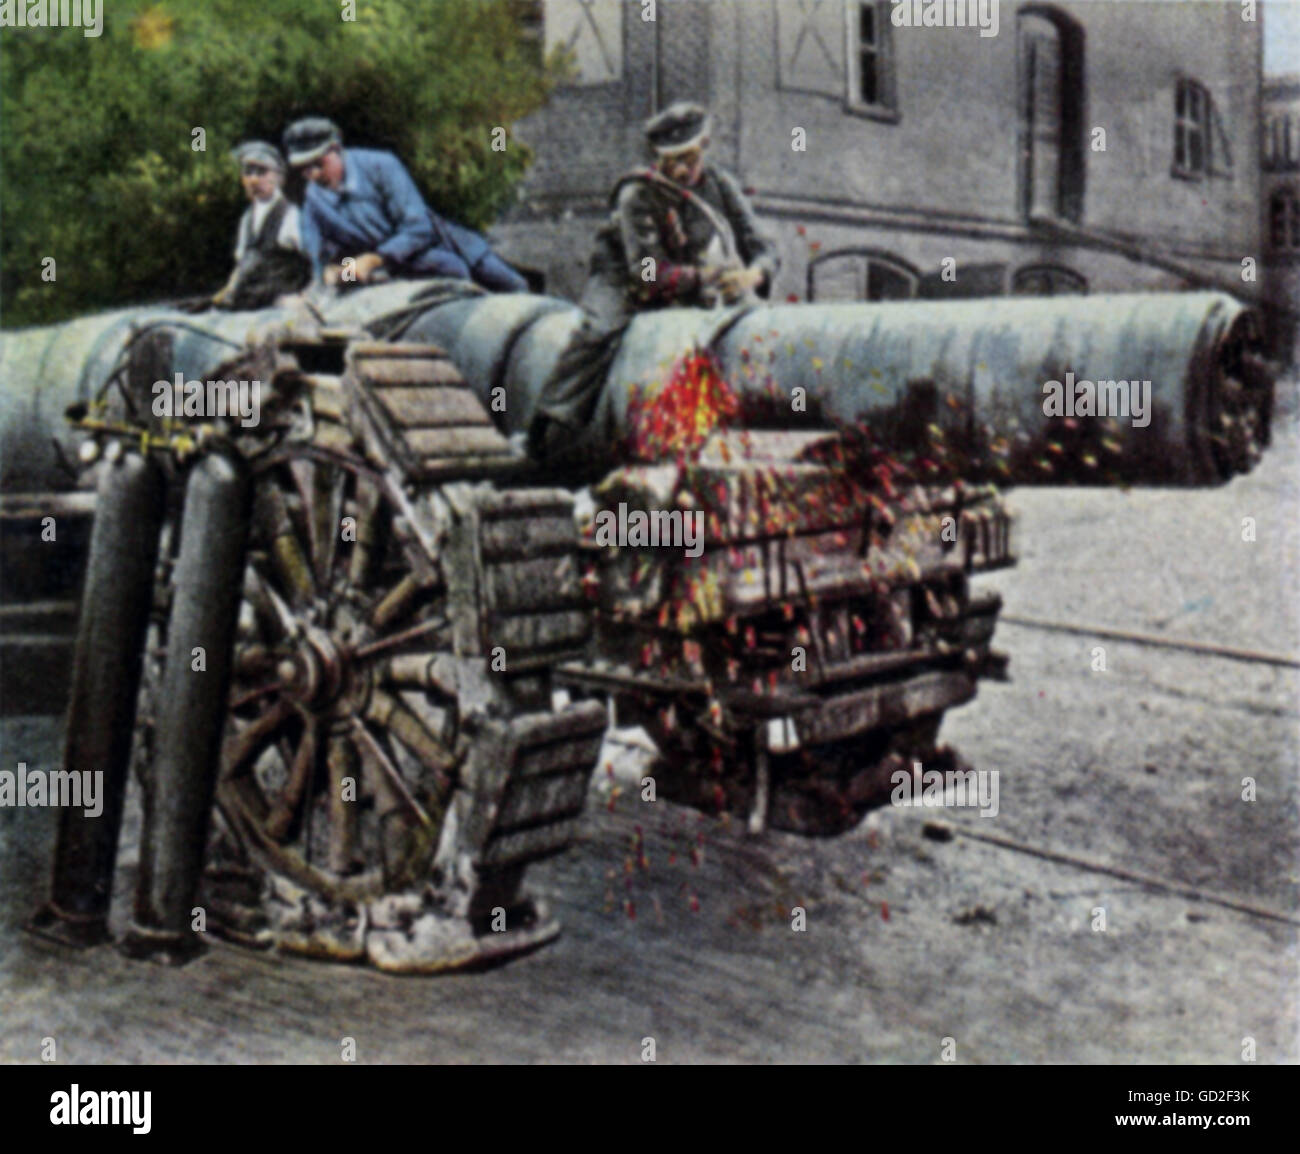 politics, demobilization of the German Army according to articles of the Versailles Treaty, disassembly of a heavy field gun, 1920, coloured photograph, cigarette card, series 'Die Nachkriegszeit', 1935, Additional-Rights-Clearences-Not Available Stock Photo